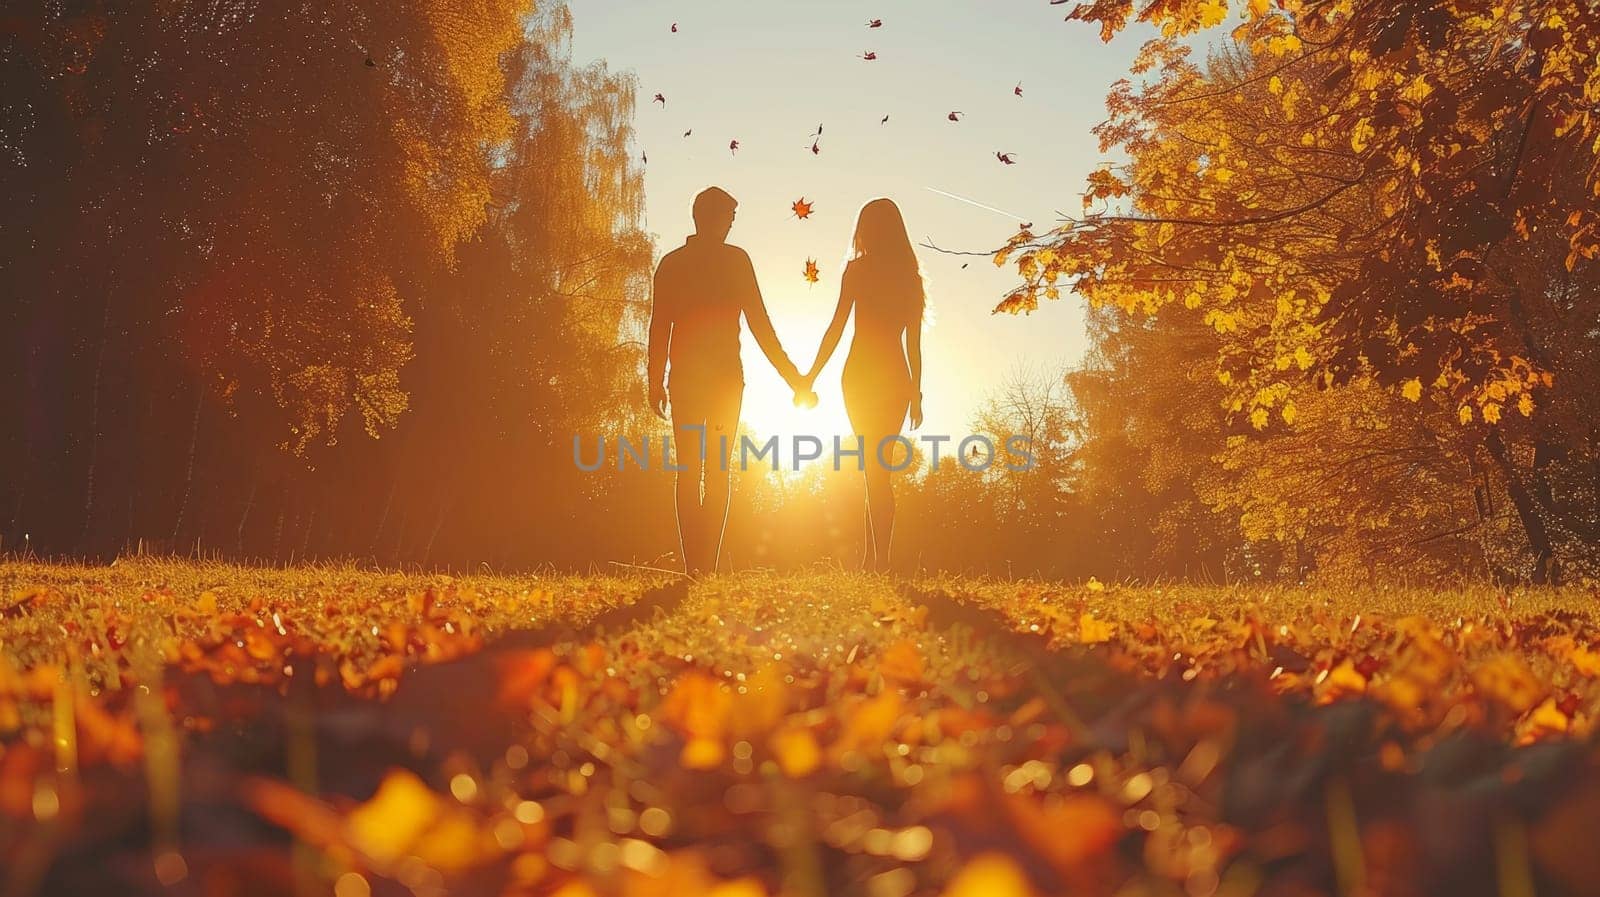 A couple holding hands in a field of yellow leaves